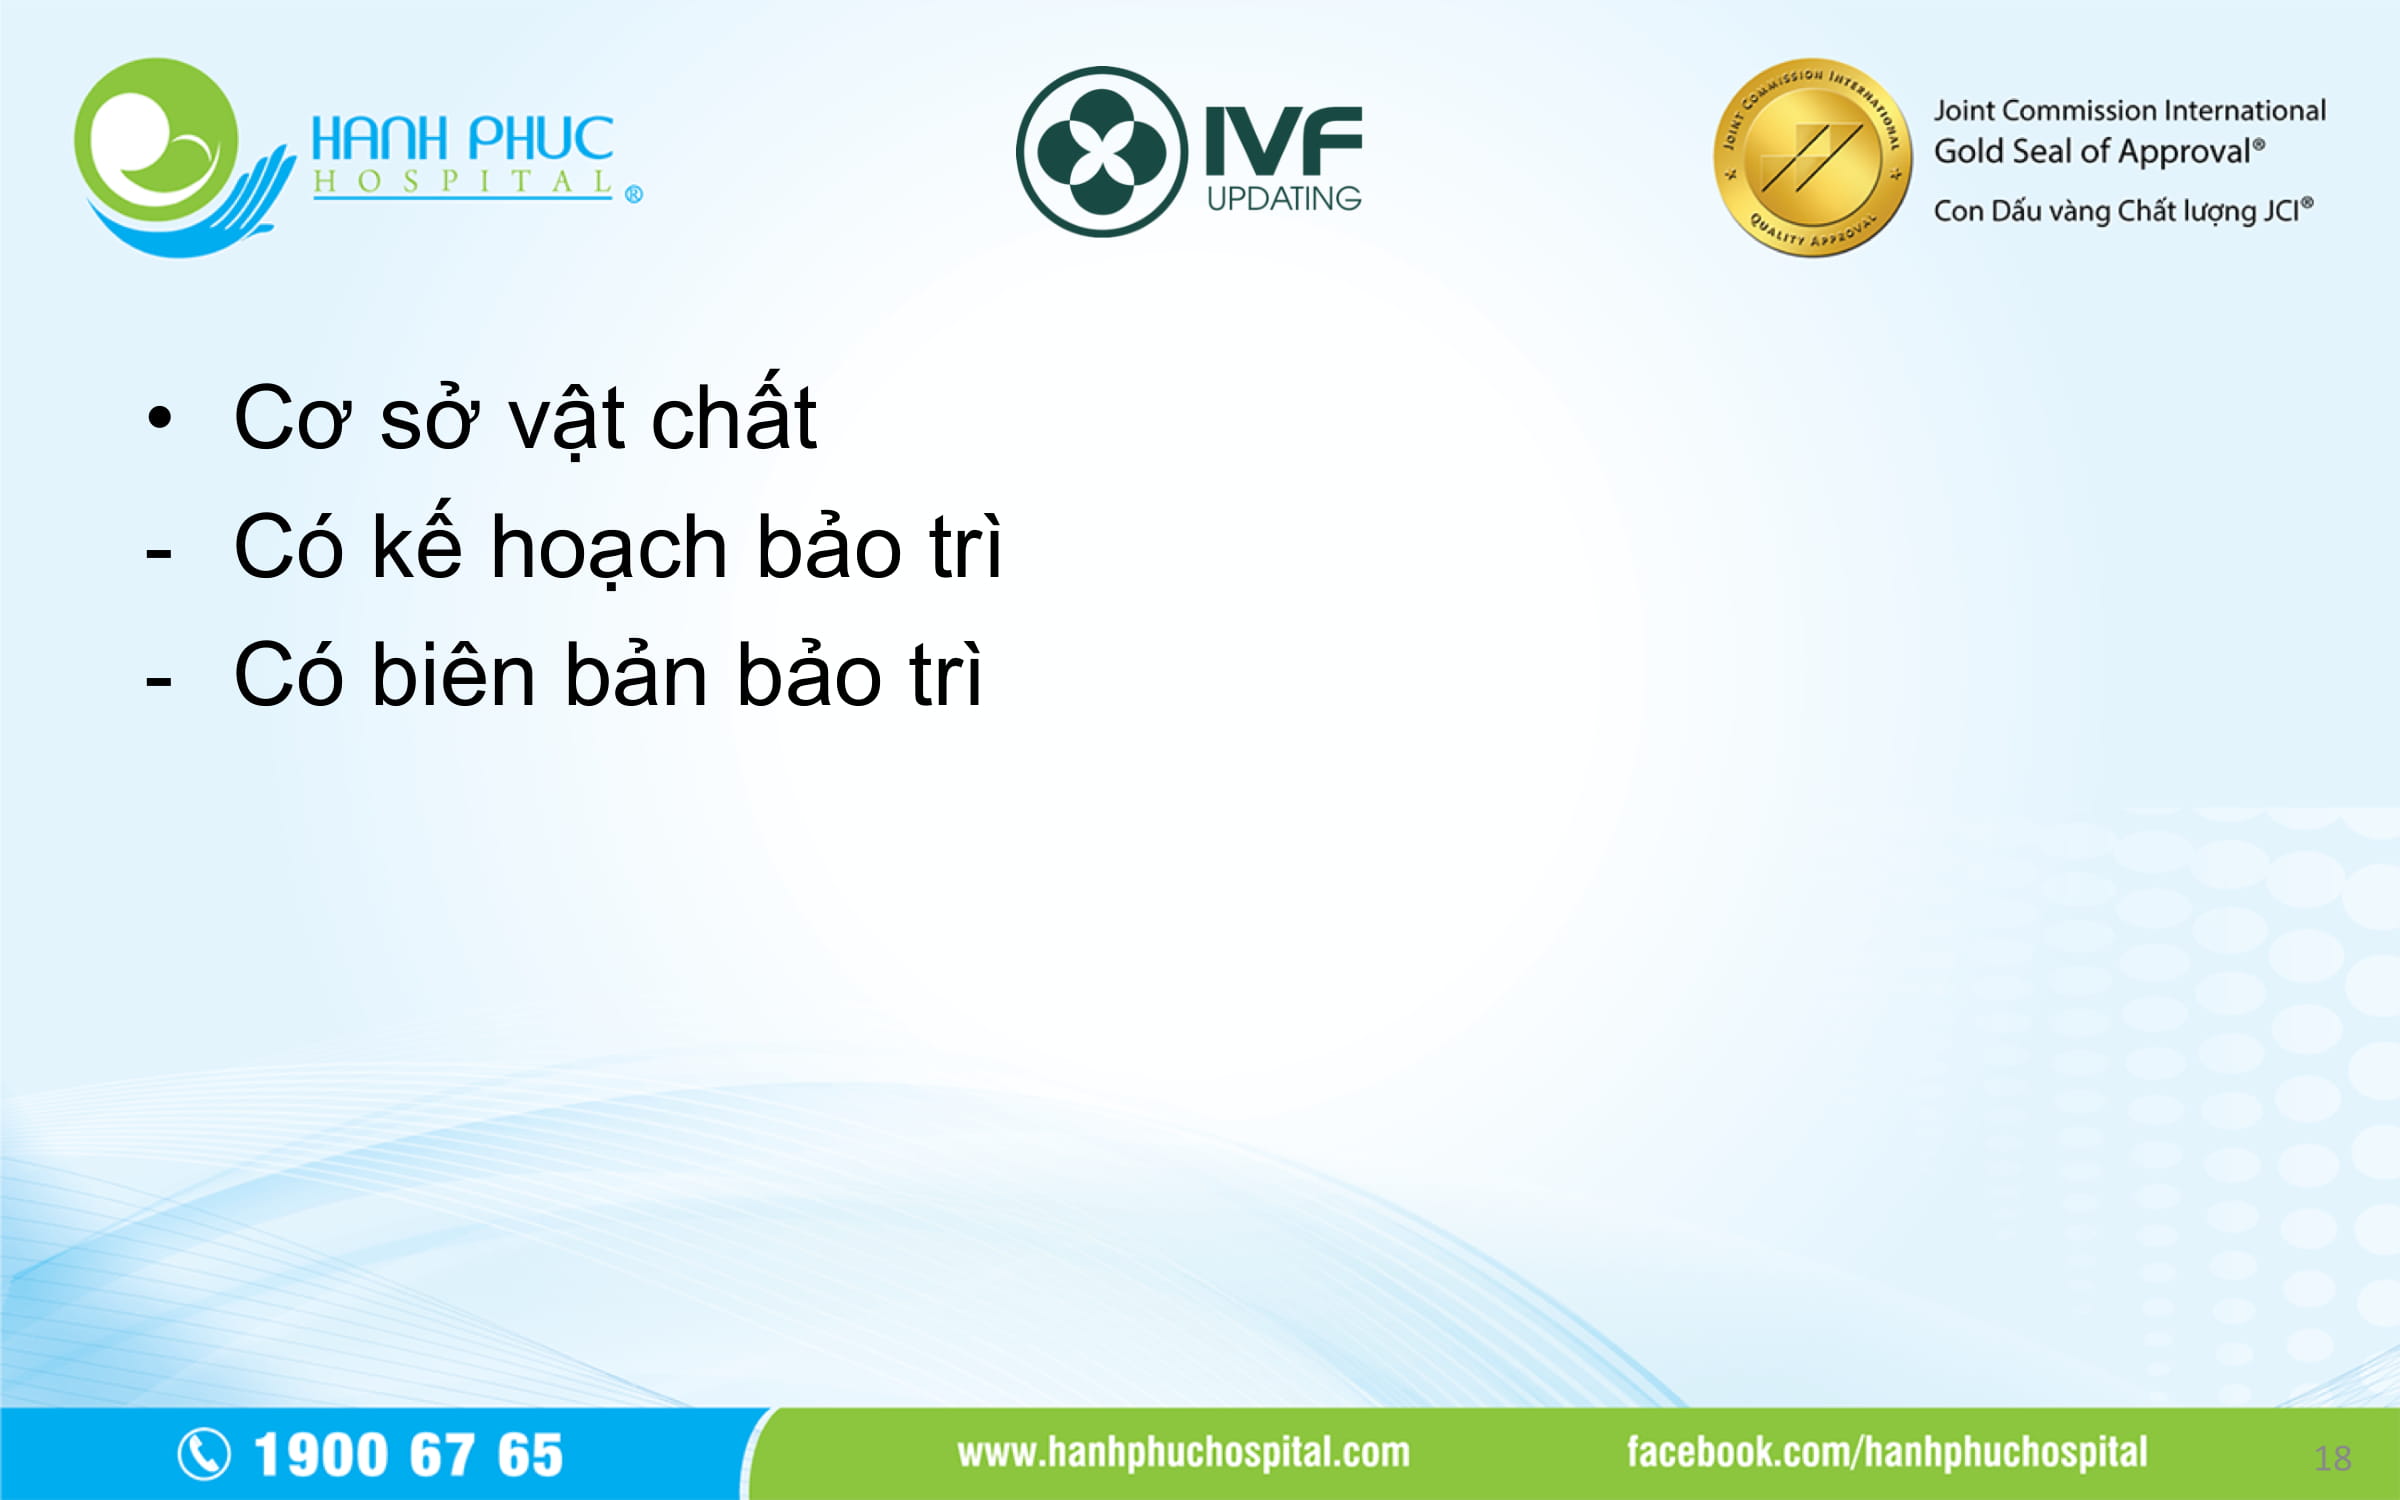 BS Vo Thien An Report_IVF UPDATING 5-18